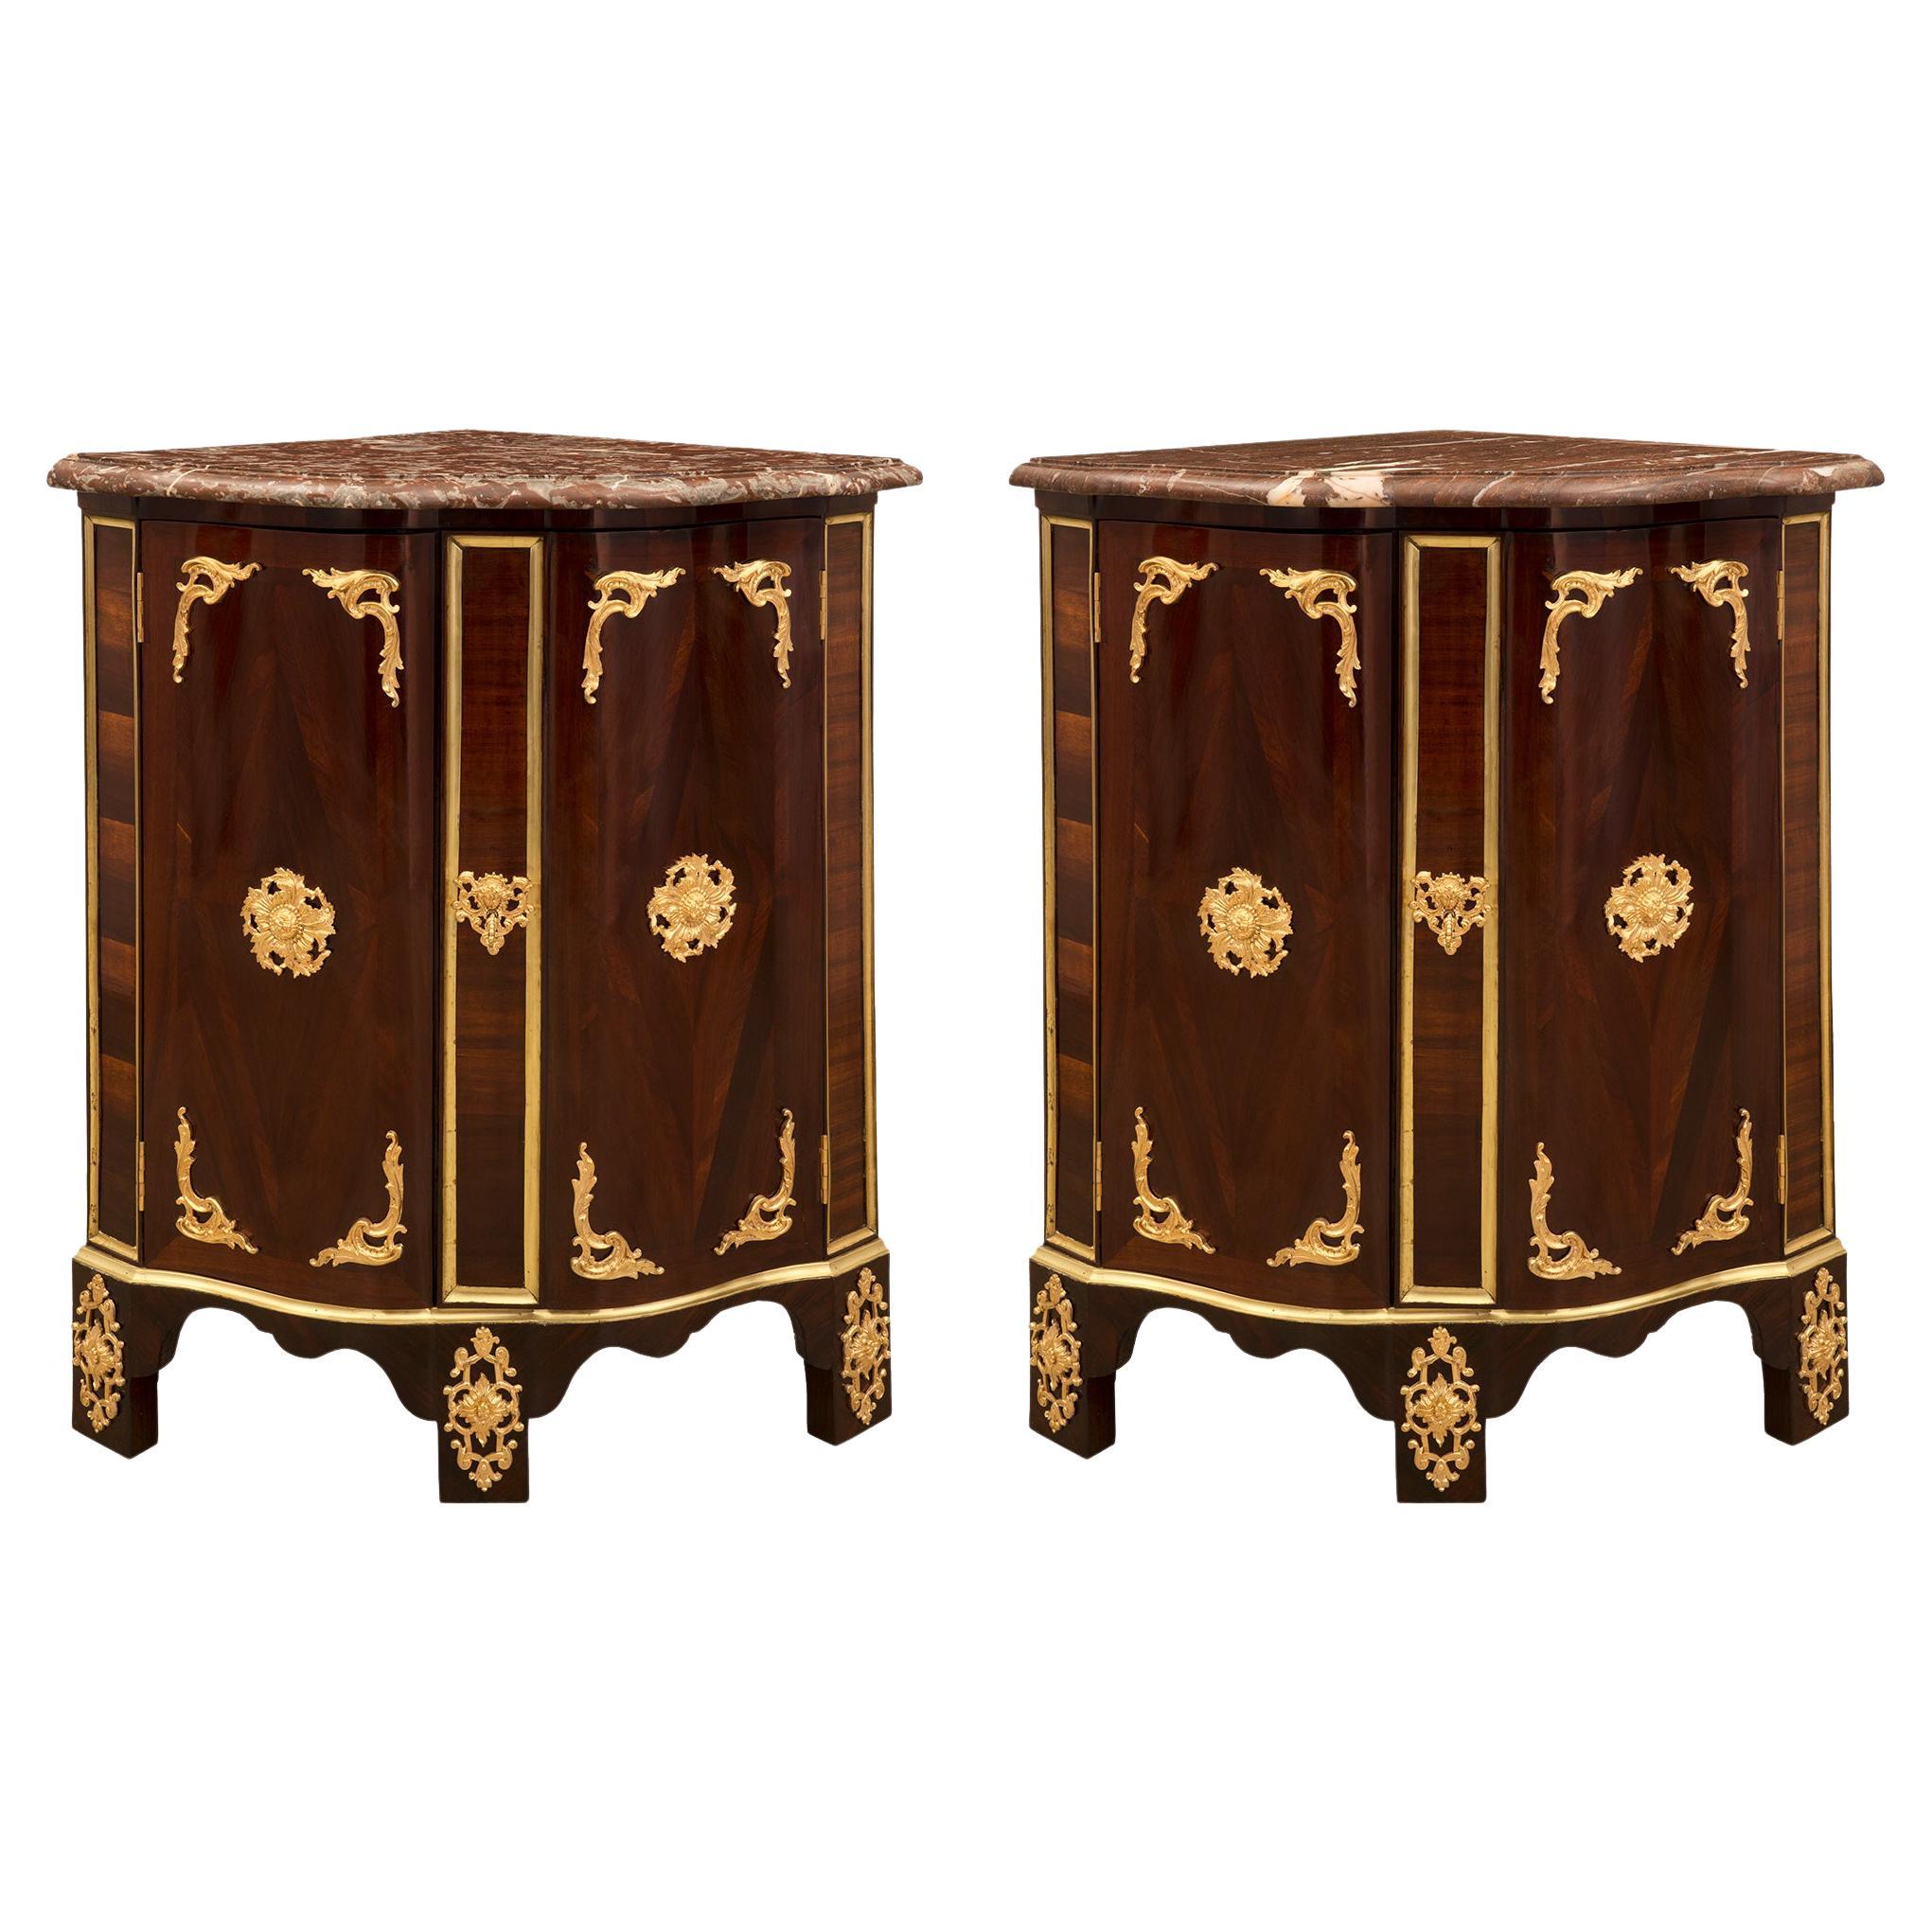 Pair of French 18th Century Régence St. Encoignure Corner Cabinets For Sale